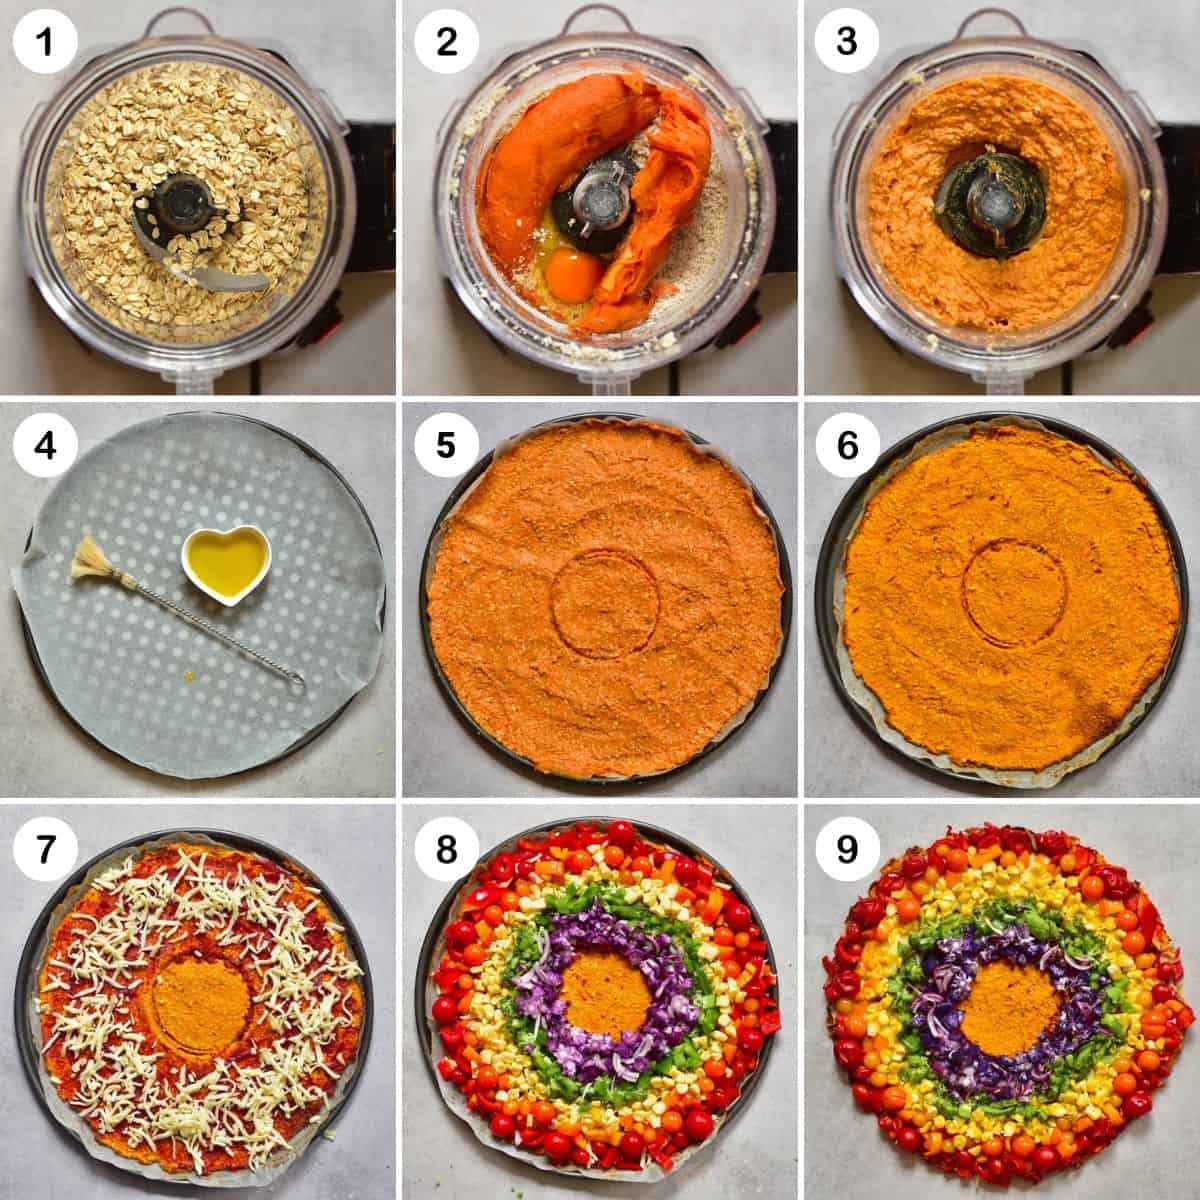 Steps for making sweet potato crust and making rainbow pizza